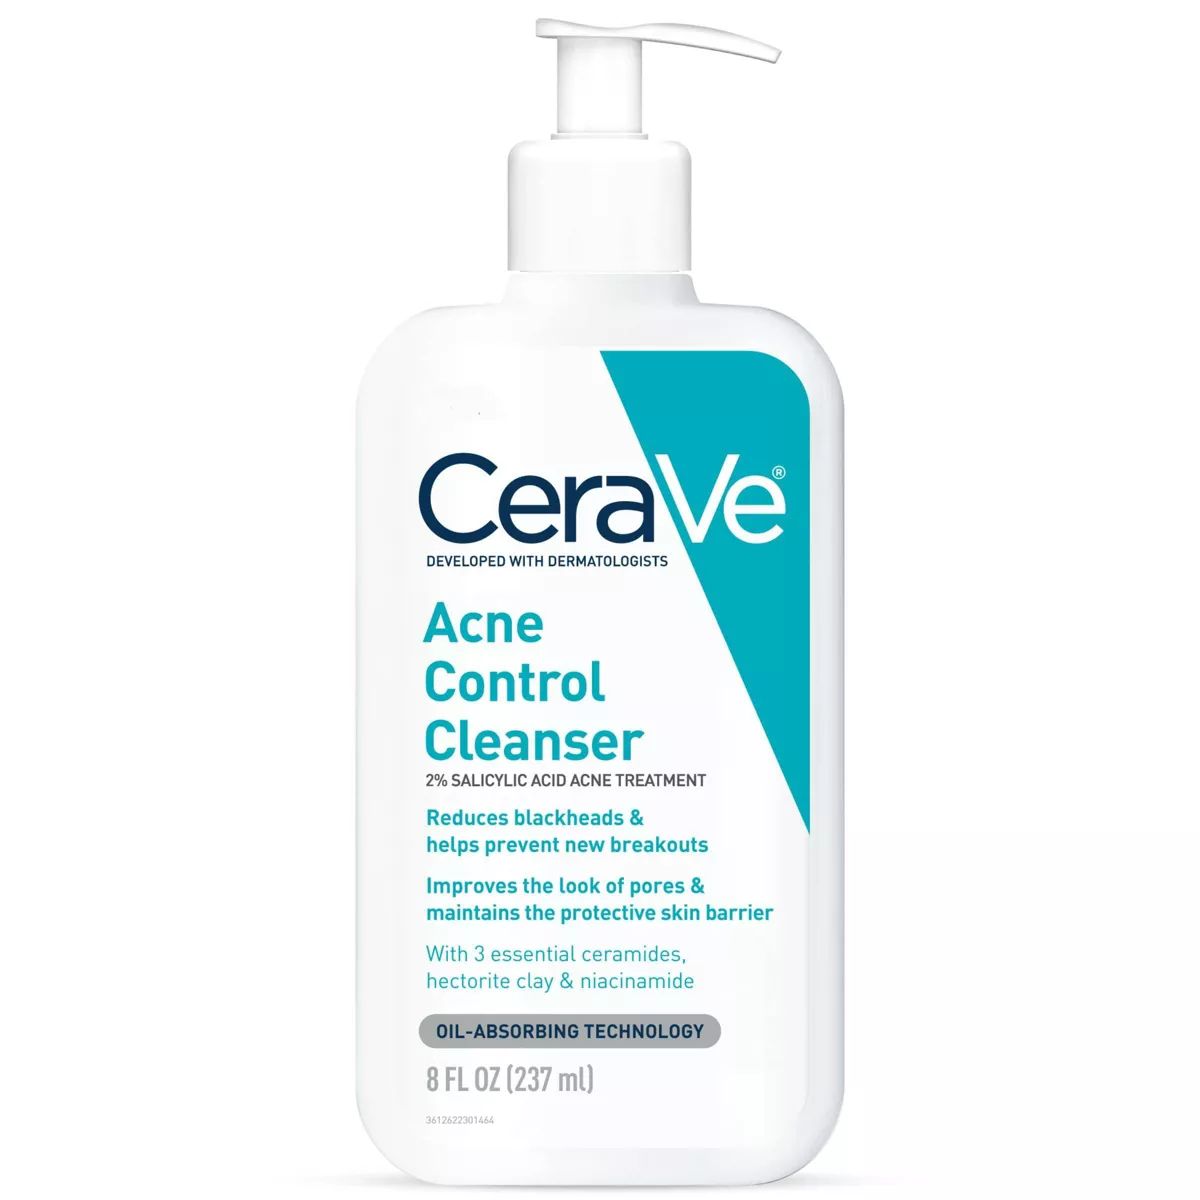 CeraVe Acne Face Cleanser with 2% Salicylic Acid and Purifying Clay for Oily Skin | Target